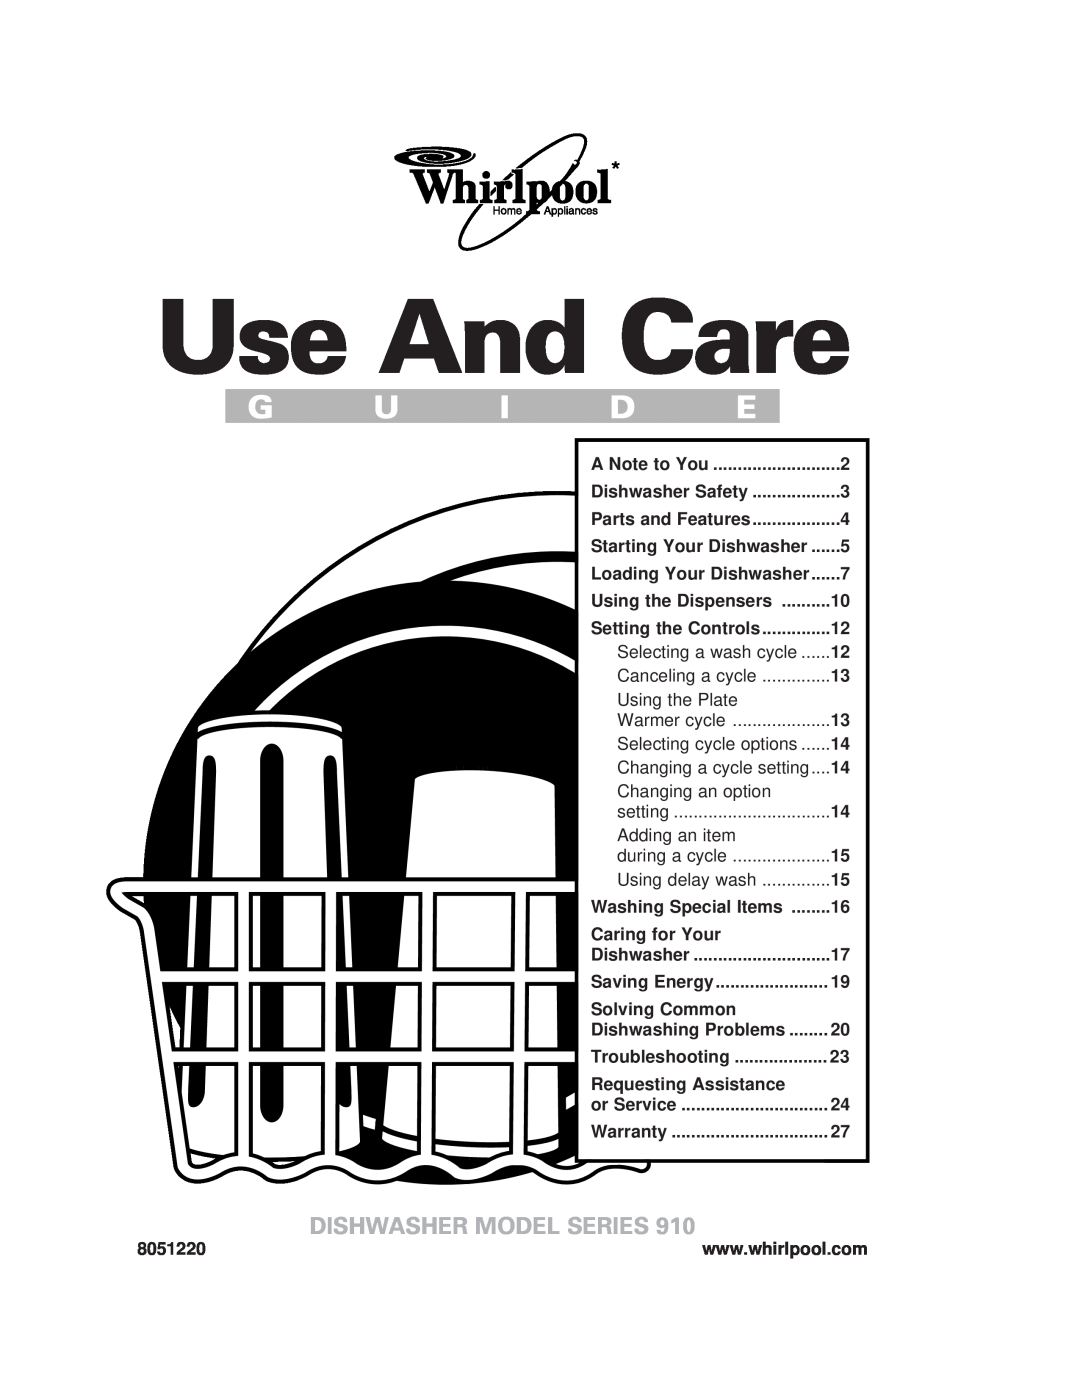 Whirlpool 910 Series warranty Use And Care, Dishwasher Model Series 